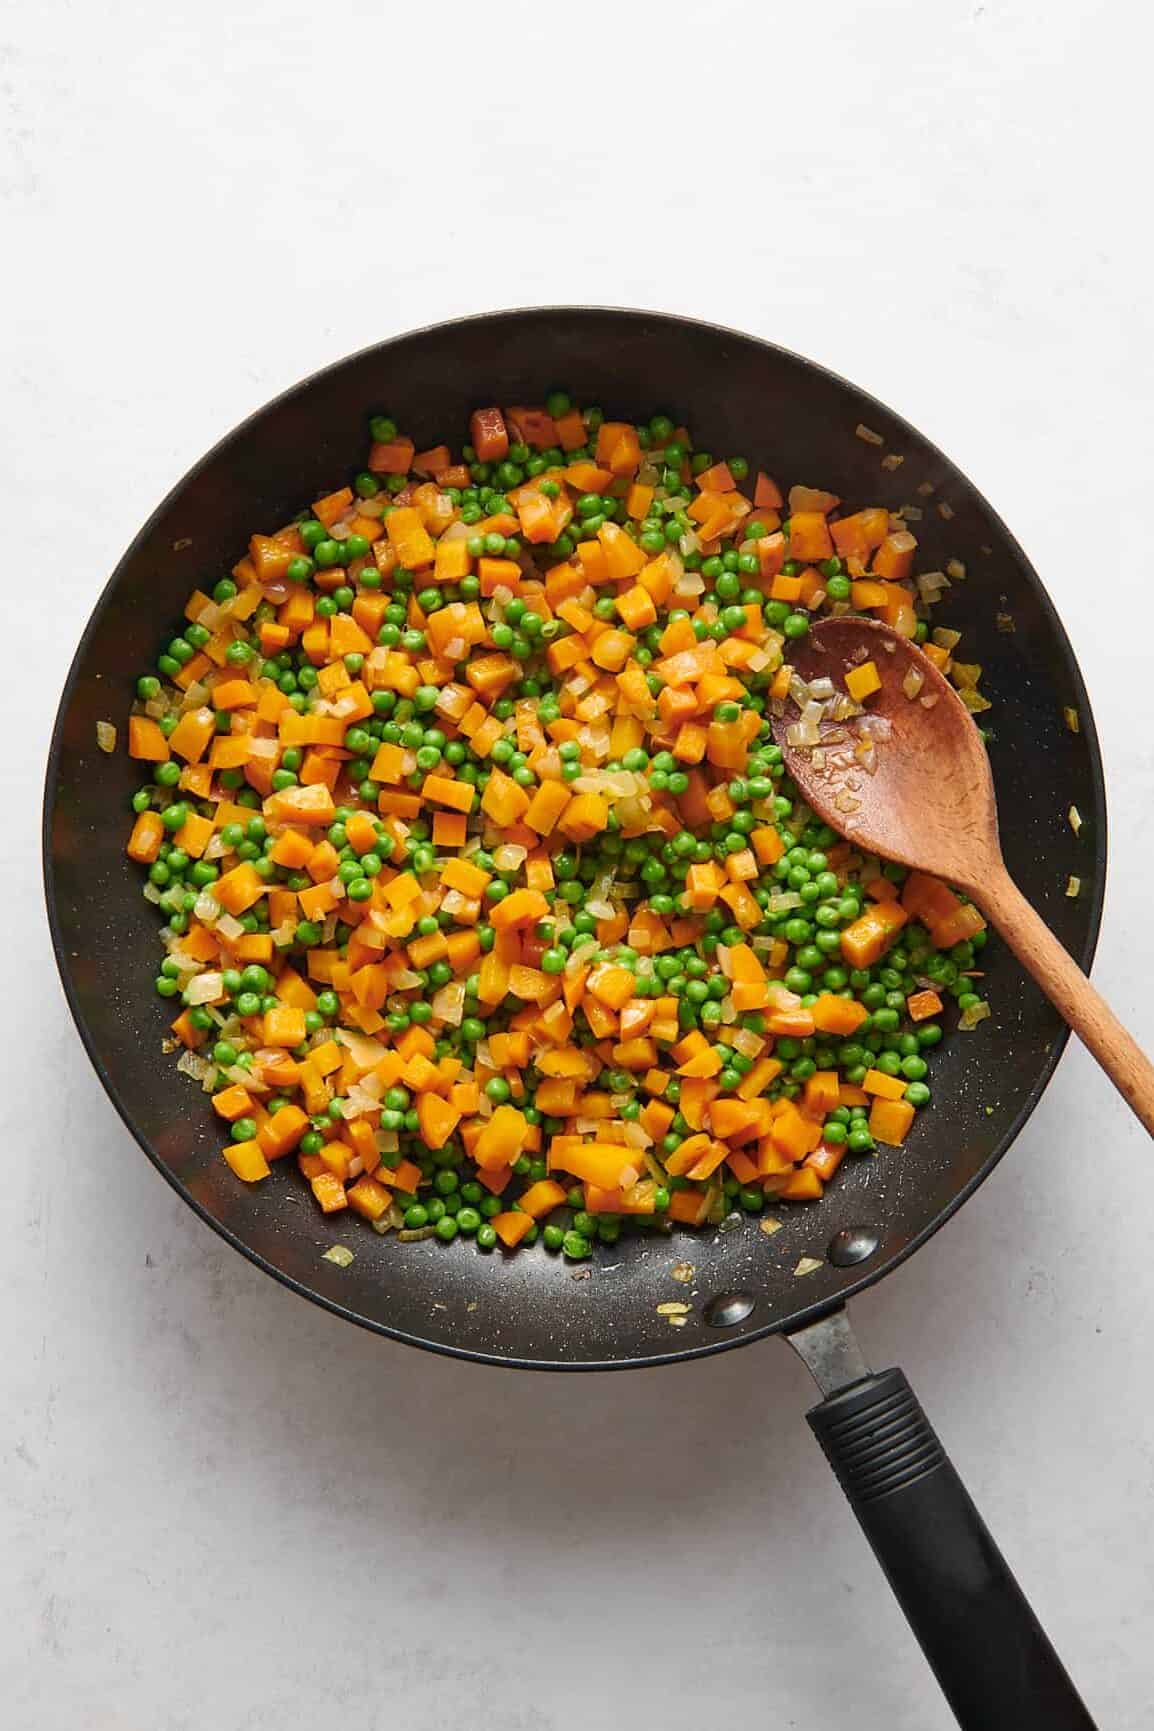 large skillet with chopped carrots and peas